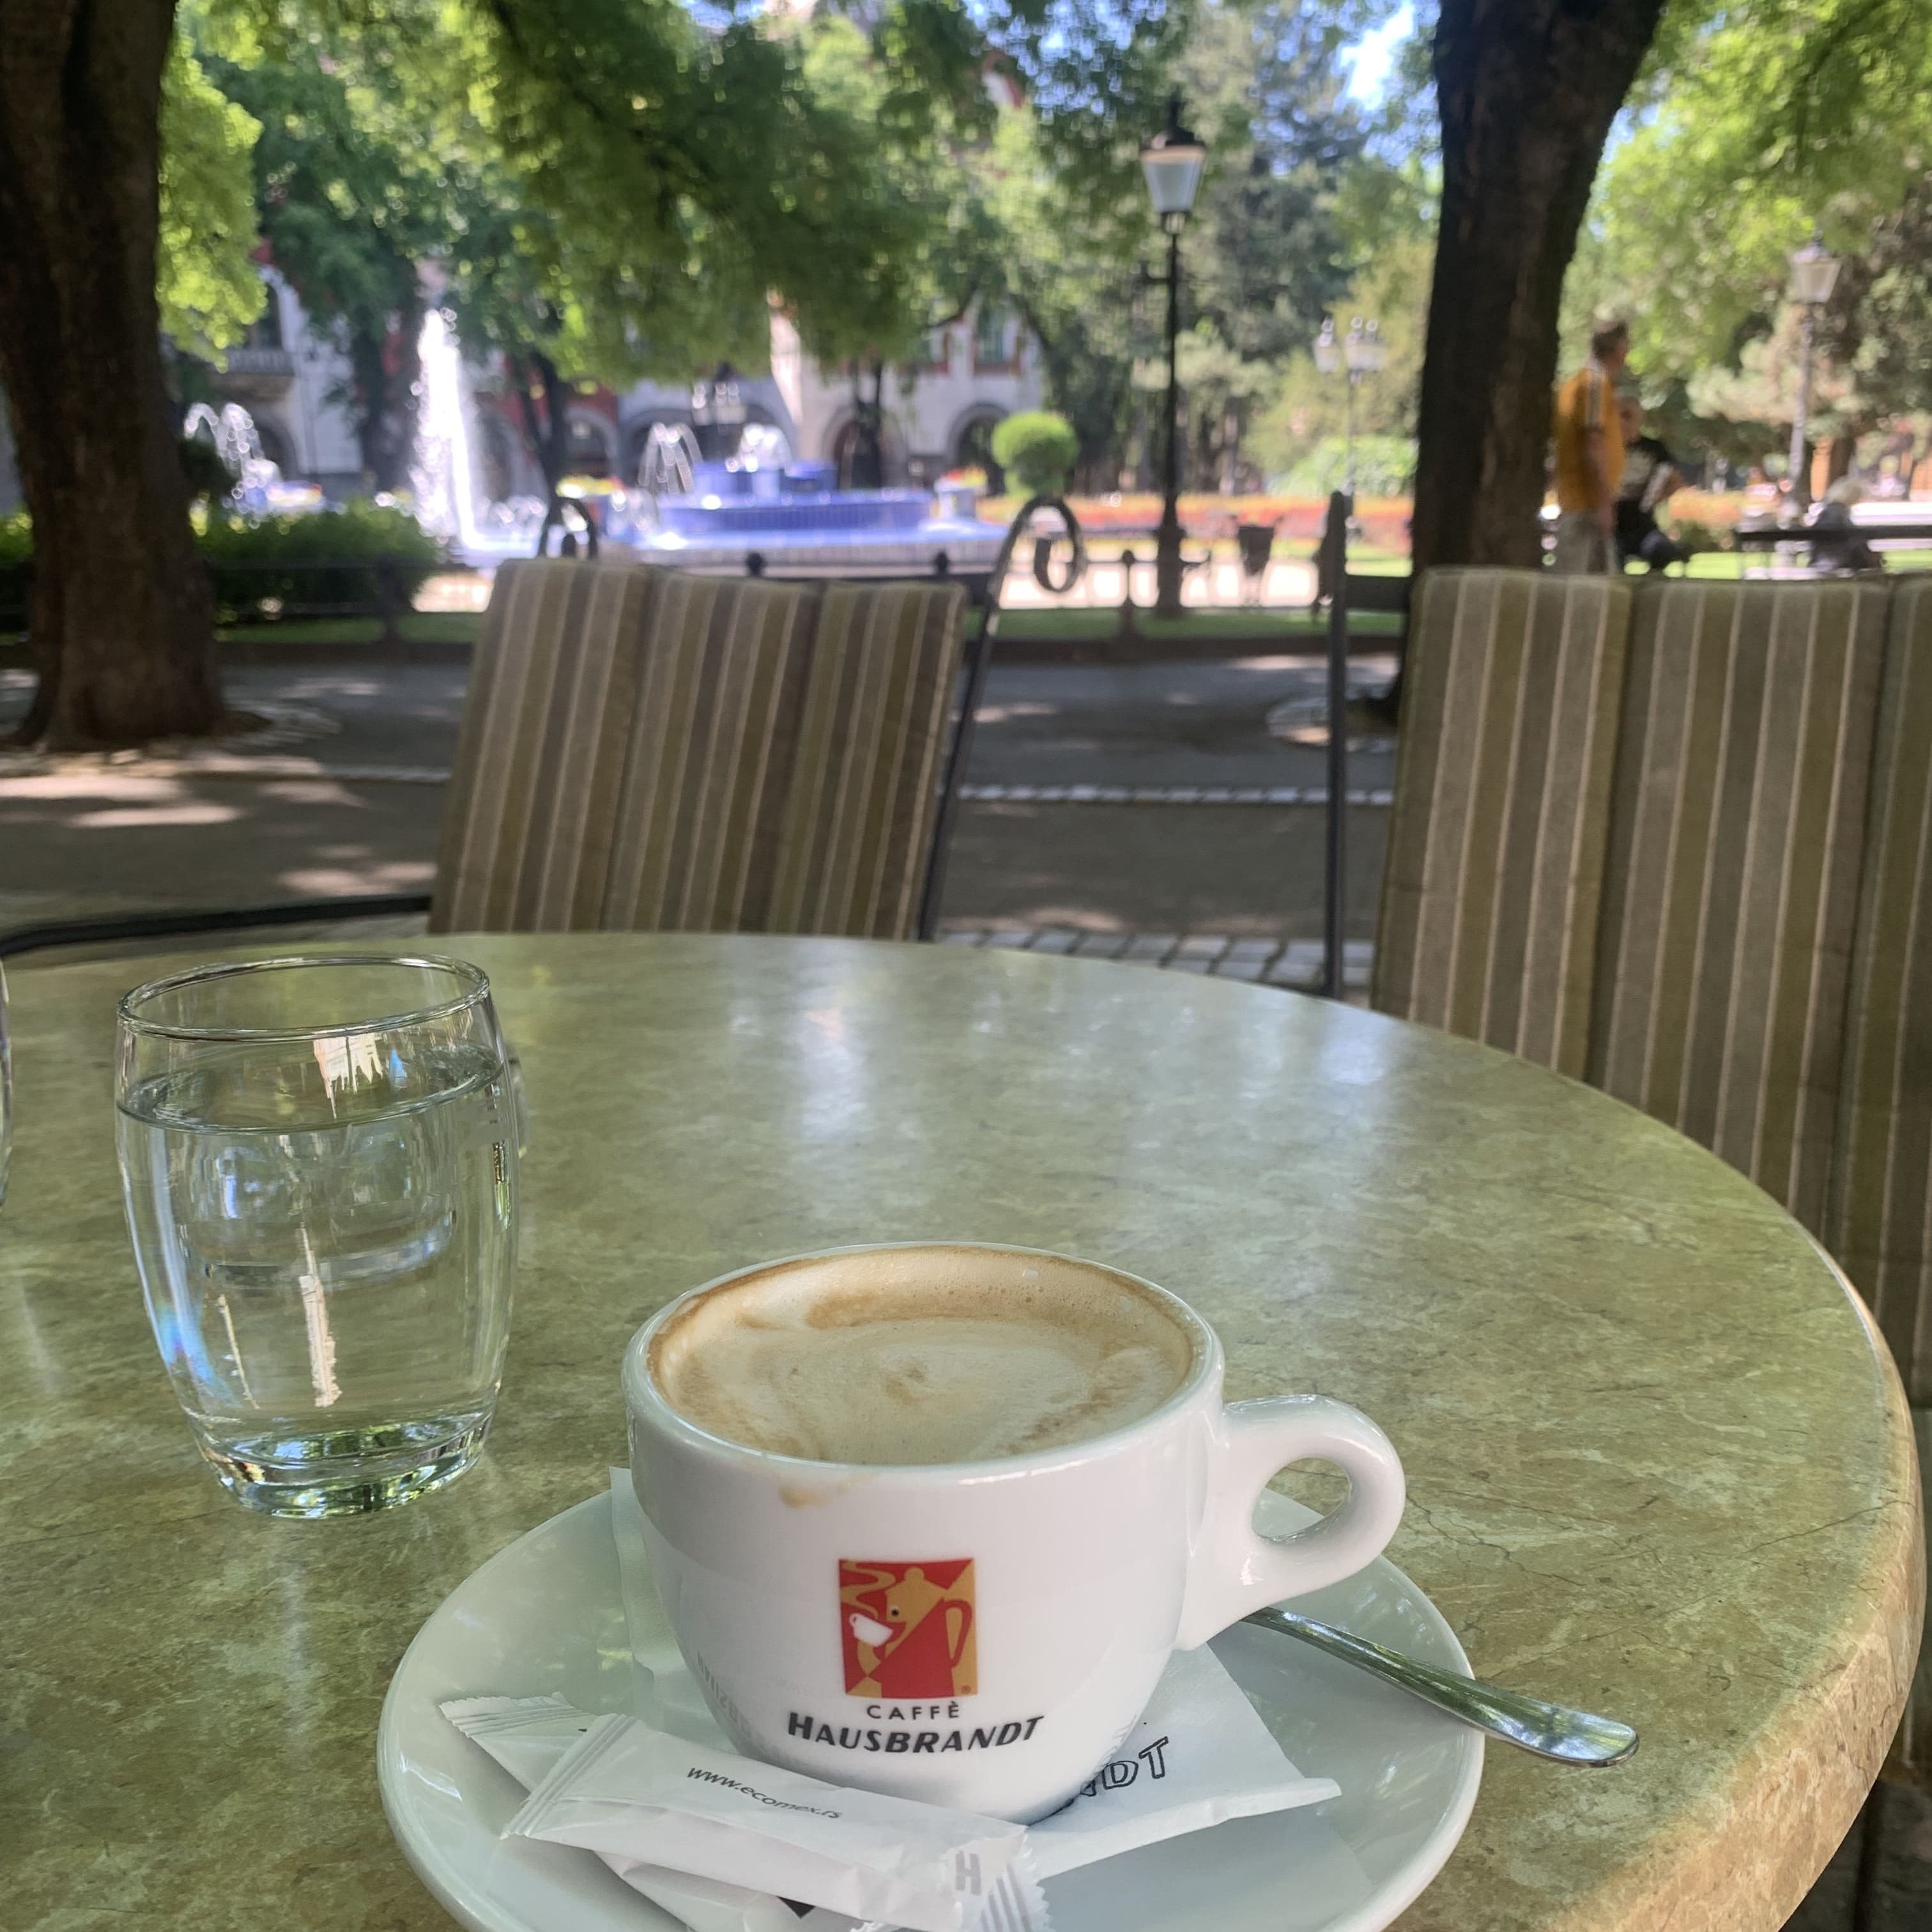 Coffee stop in Subotica, Serbia